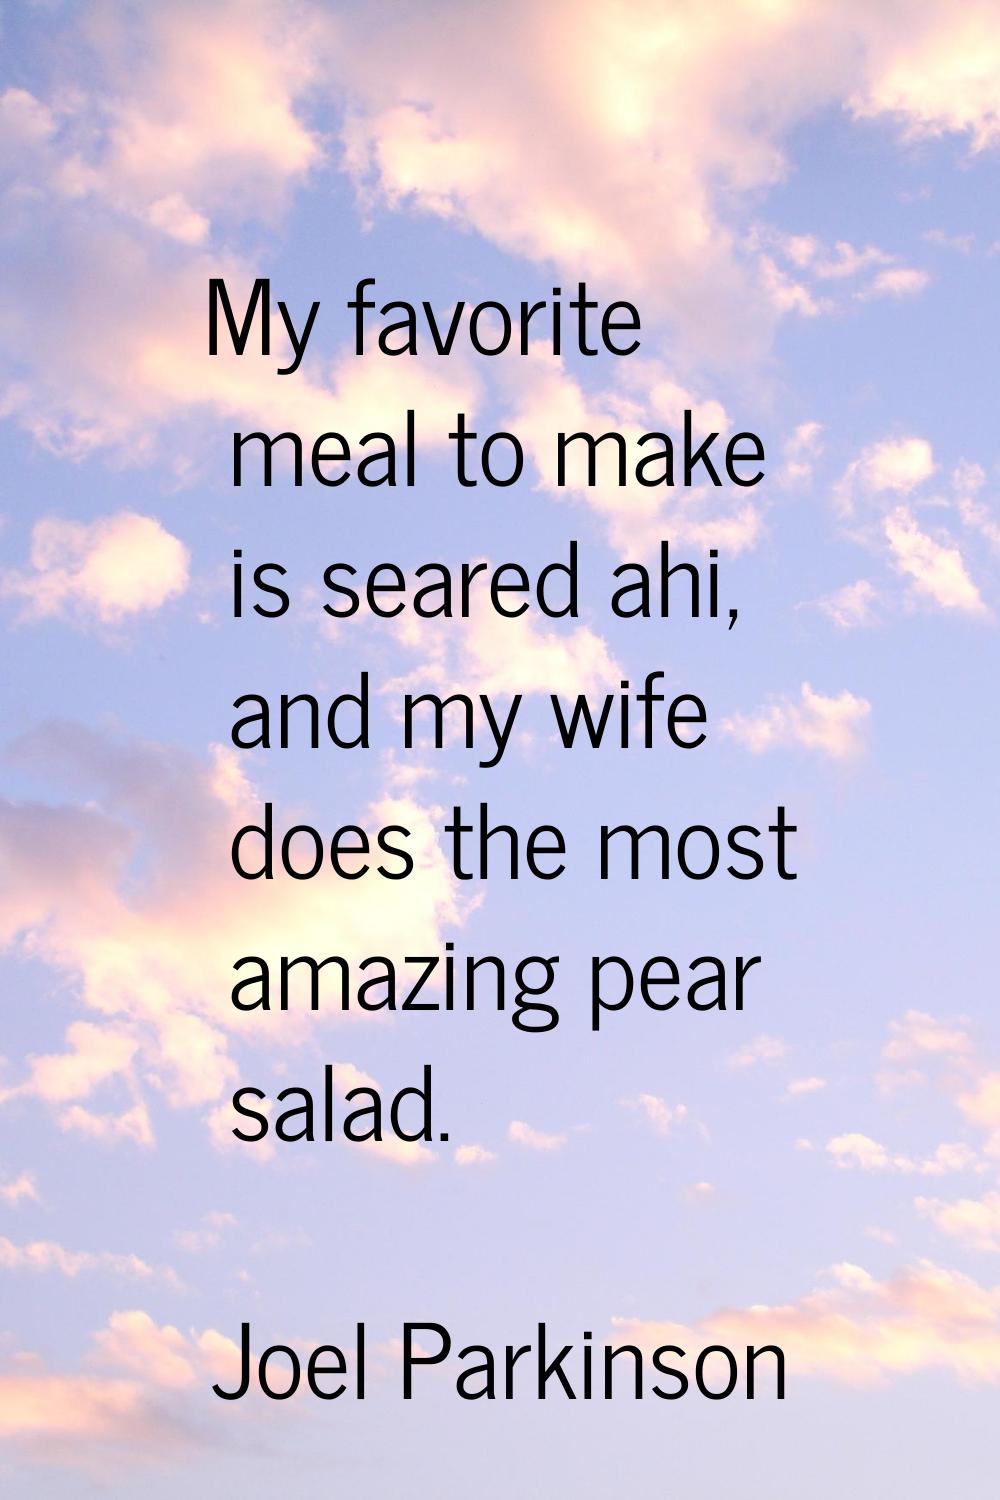 My favorite meal to make is seared ahi, and my wife does the most amazing pear salad.